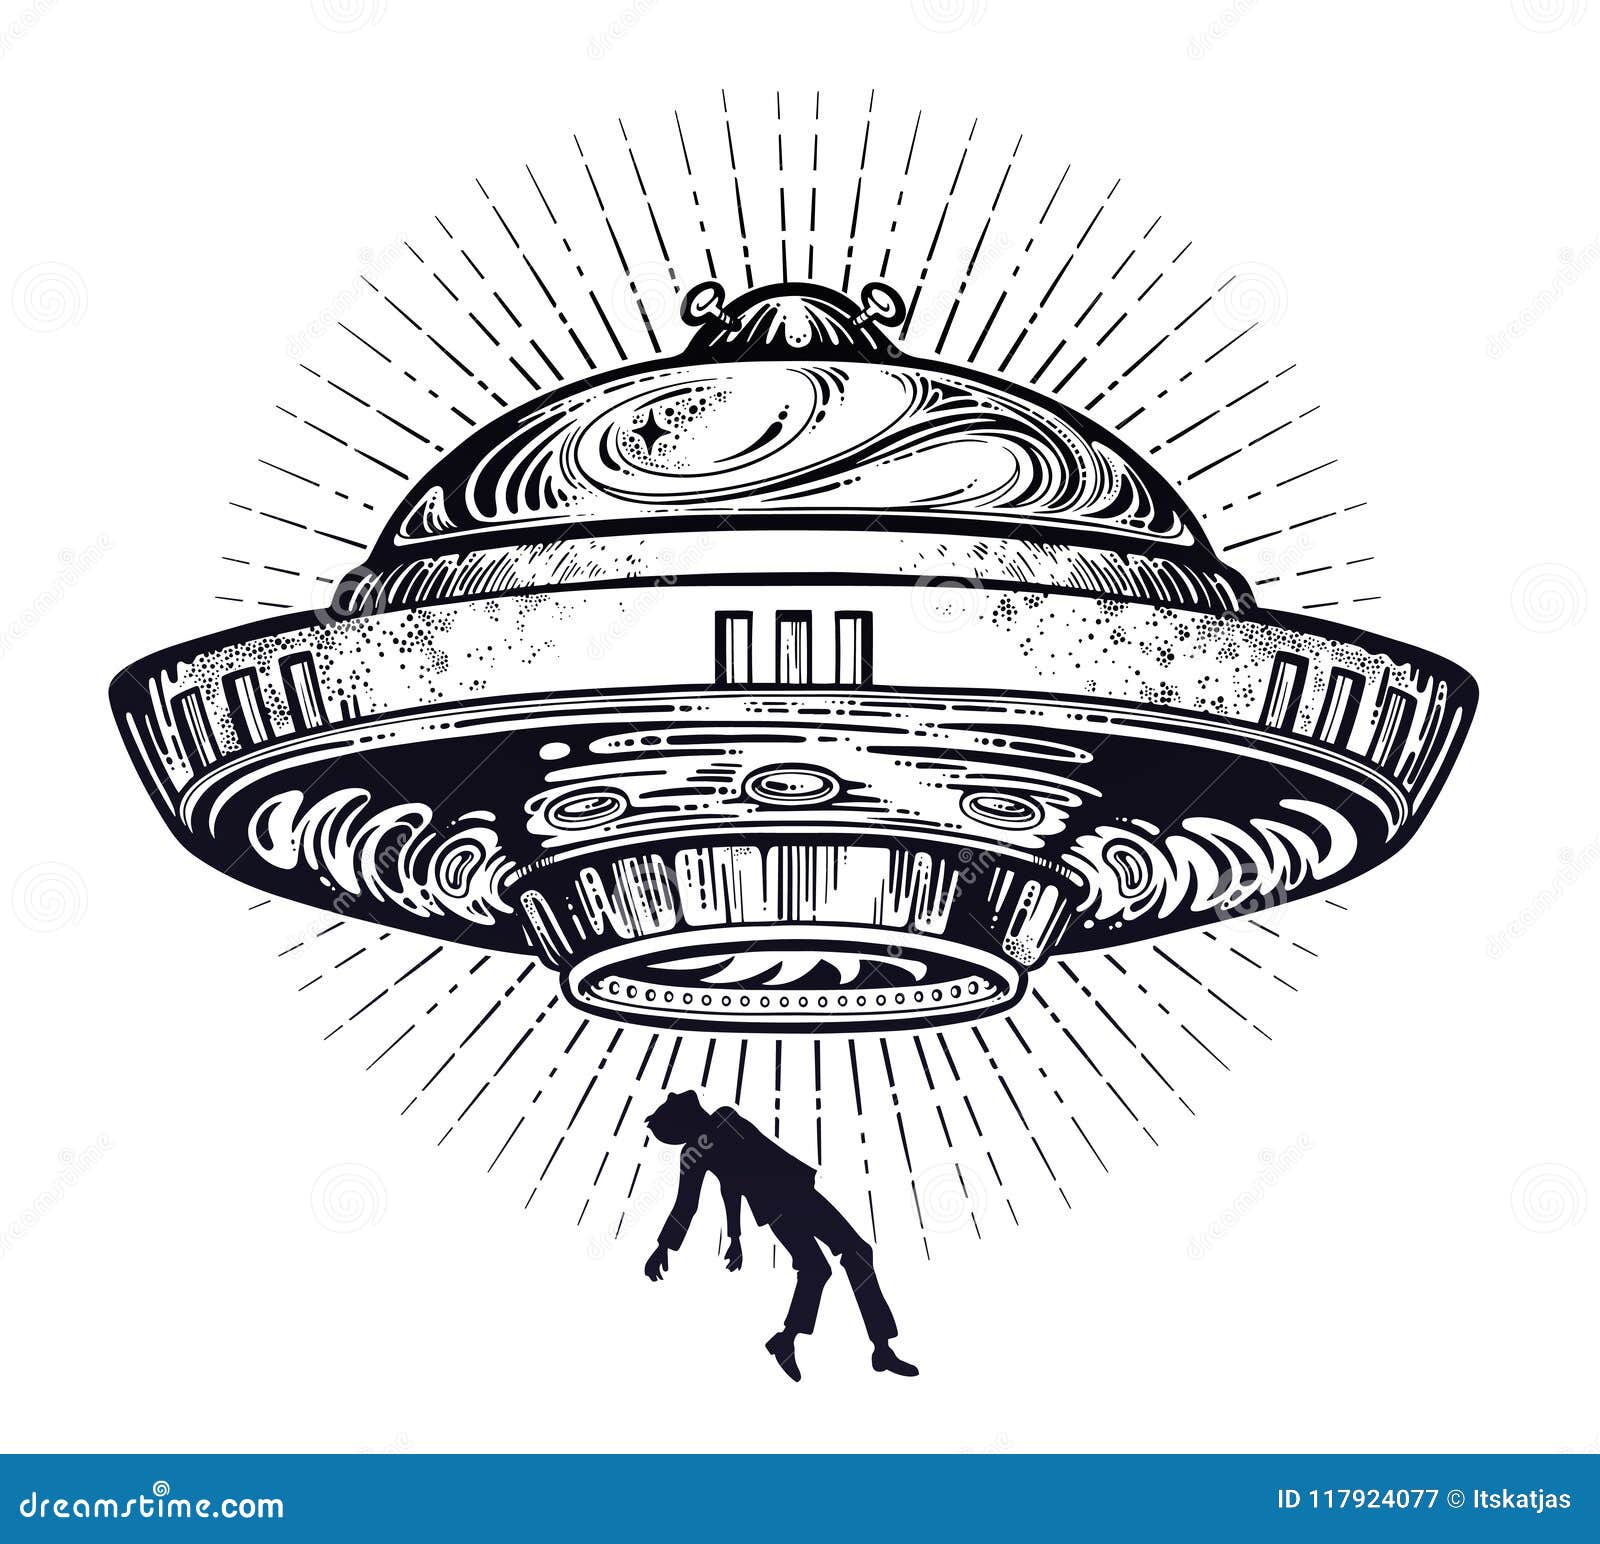 Fantastic Alien Spaceship. UFO Abduction of a Human with Flying Saucer Icon  Stock Vector - Illustration of saucer, flying: 117924077